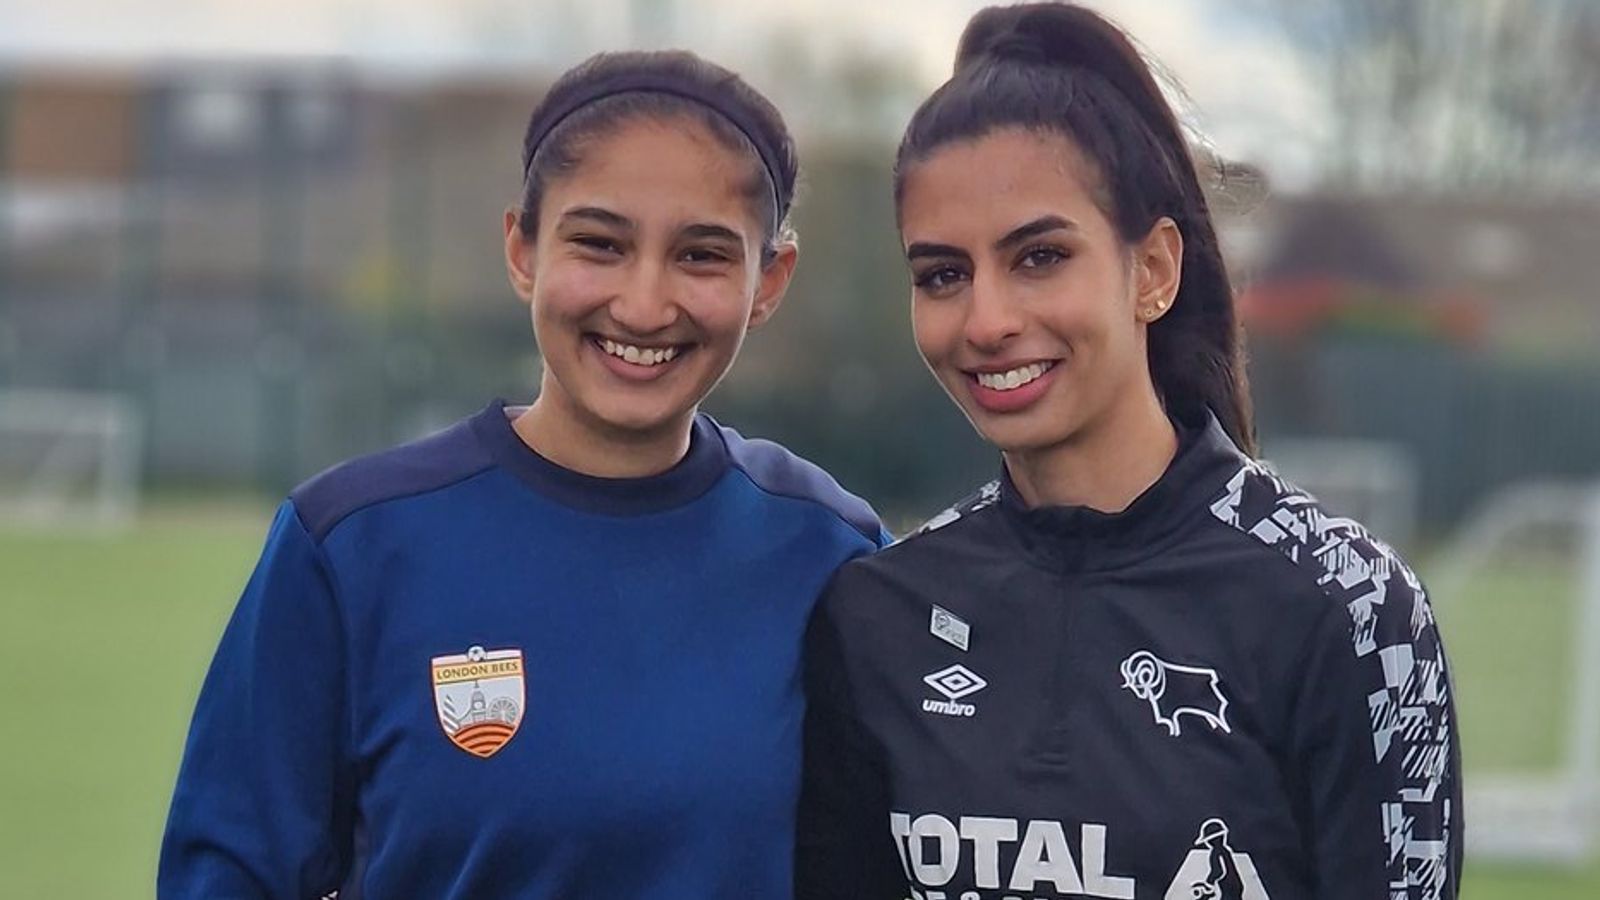 Women’s football: Derby County’s Kira Rai calls for action on diversity ahead of Nottingham Forest game at City Ground